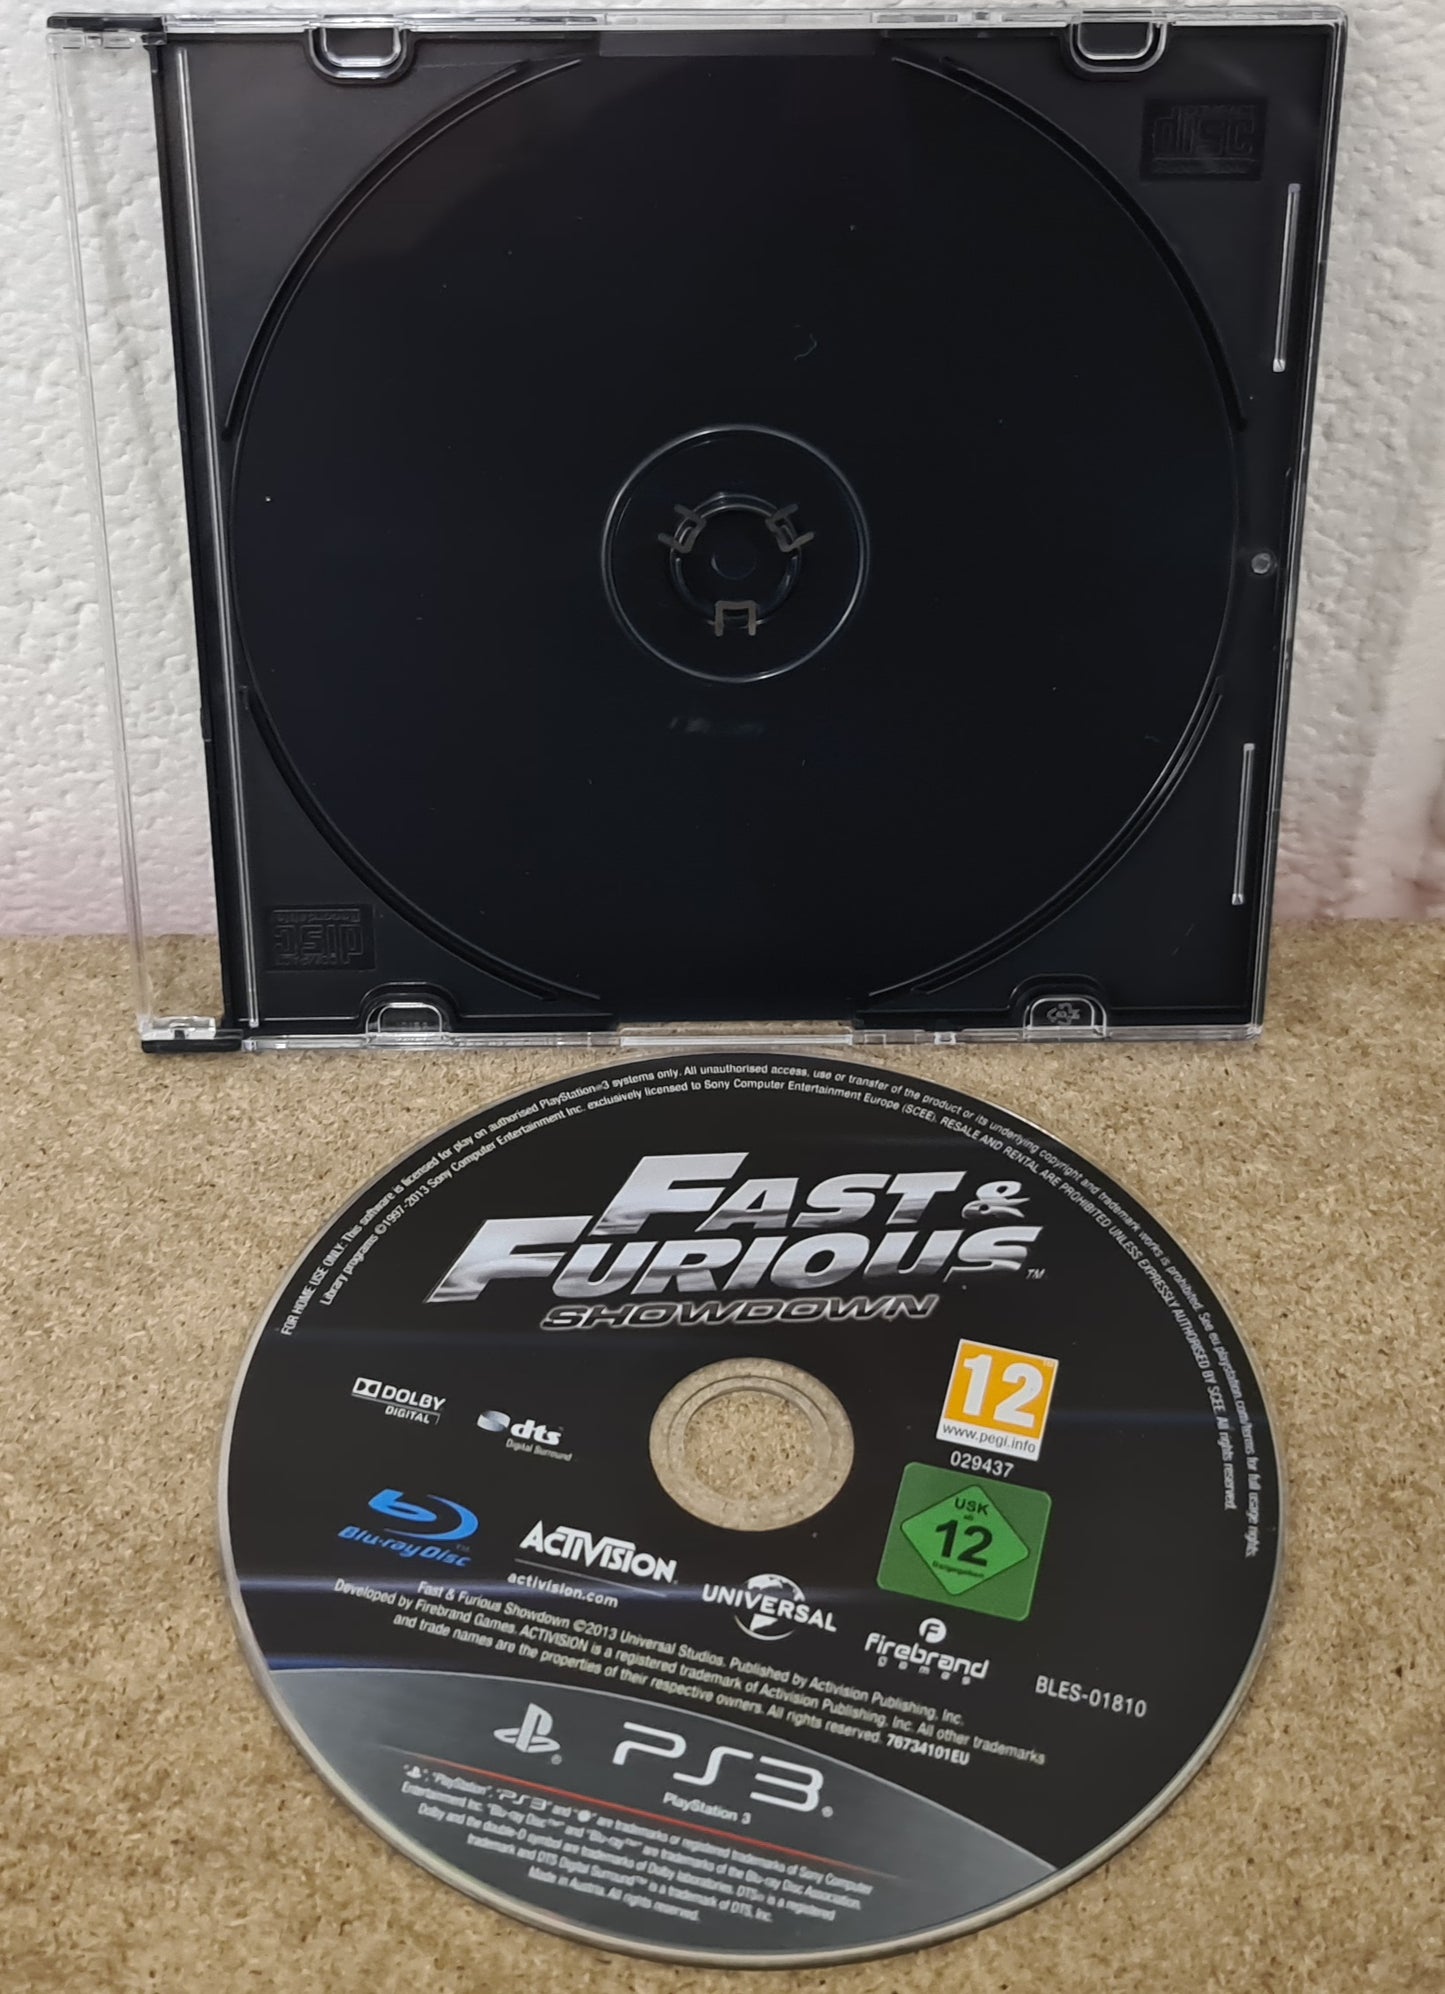 Fast & Furious Showdown Sony Playstation 3 (PS3) Game Disc Only